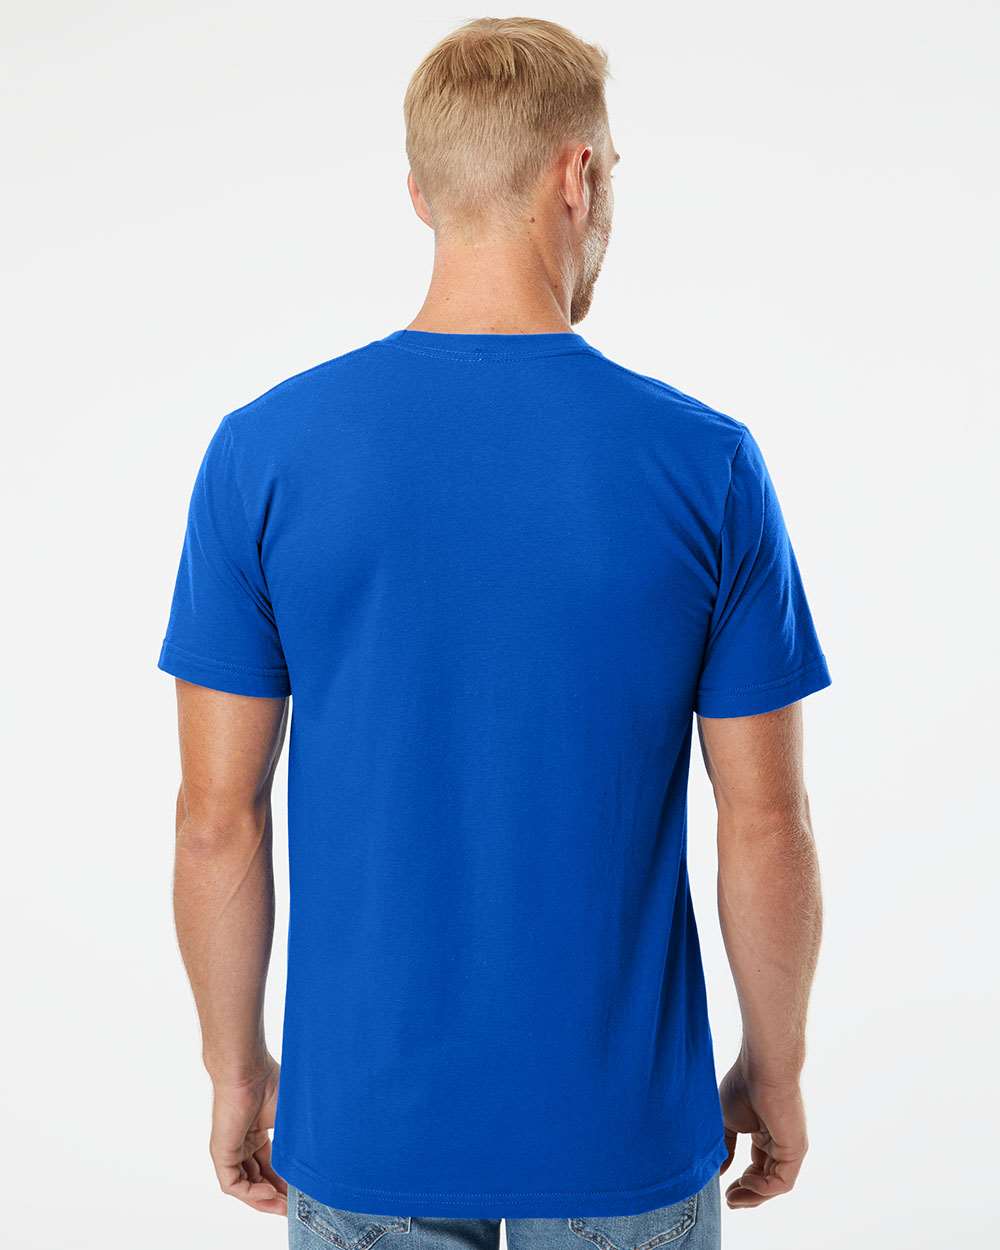 American Apparel Fine Jersey Tee 2001 #colormdl_Royal Blue